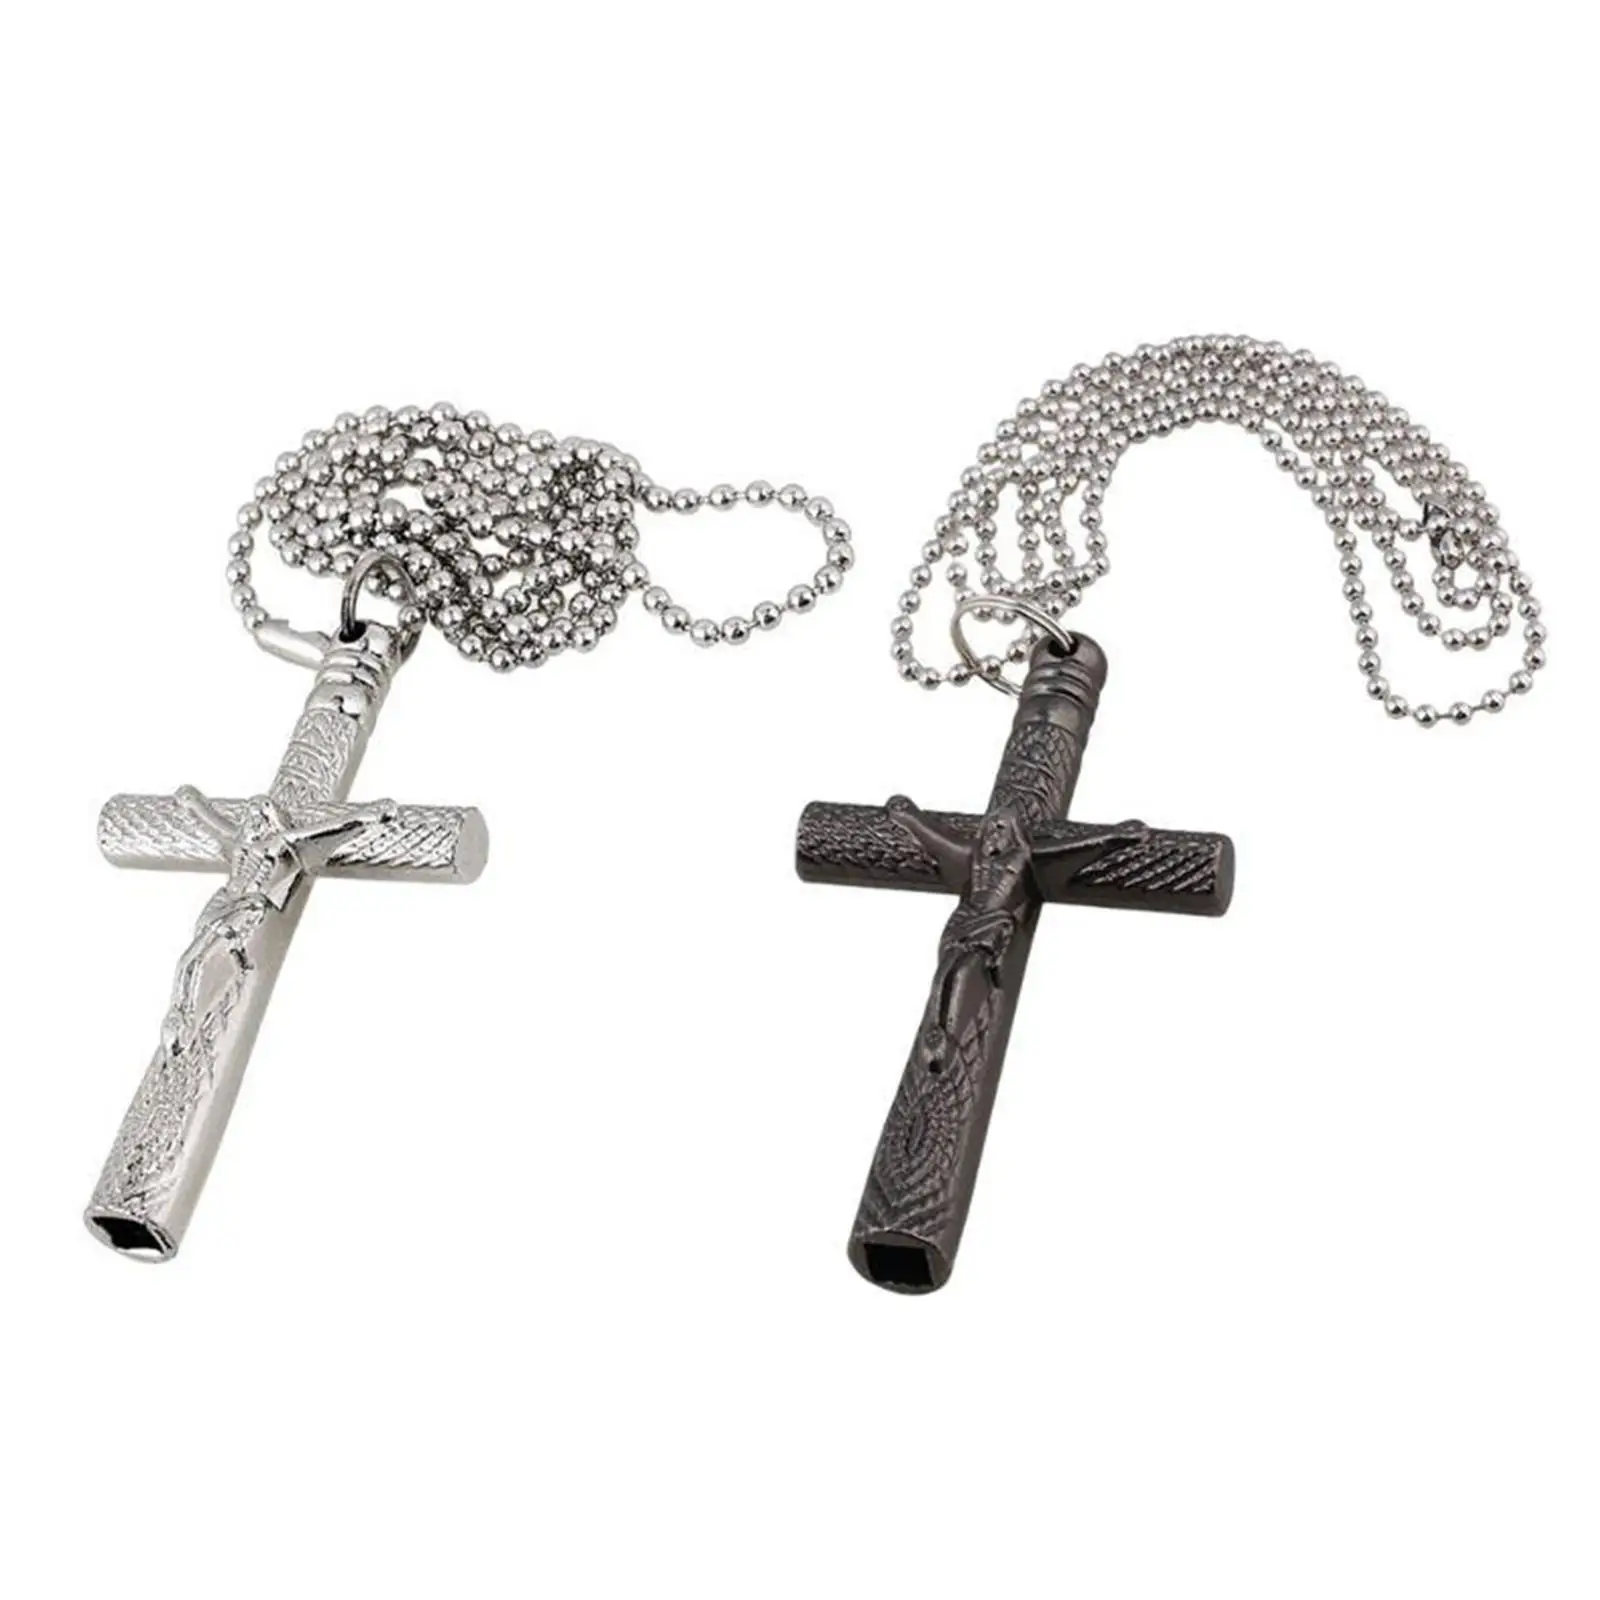 Steel Jesus Drum Key with Chain Pendant Wrench Instruments Parts Accessories